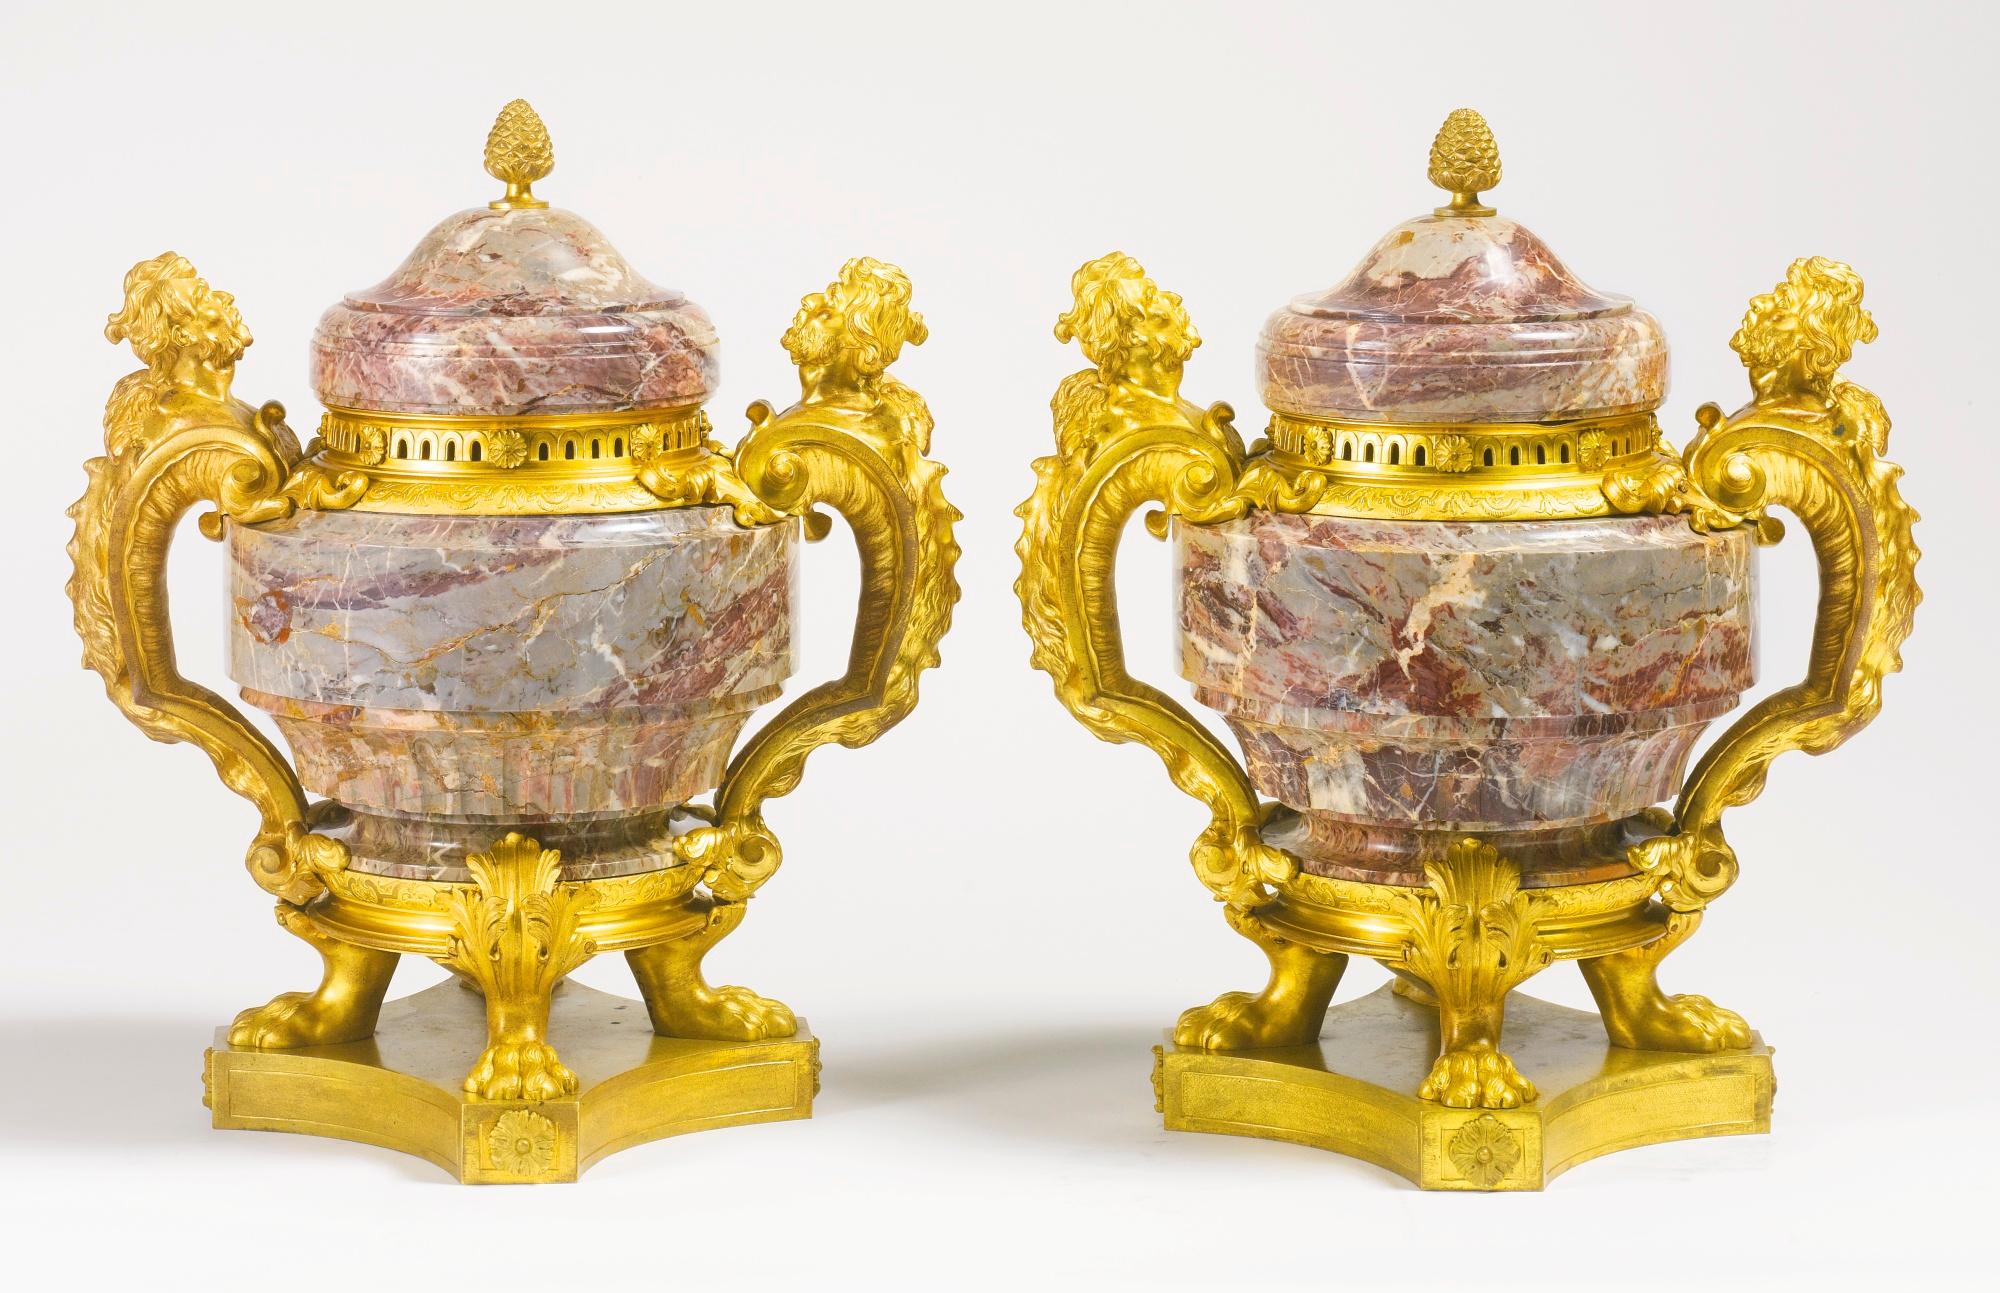 A fine pair of 19th century Louis XV style gilt-bronze mounted Sarrancolin marble urns. Marked BF followed by four digit numbers from the workshop's bronze master models

Maker: Mathieu Béfort dit Béfort Jeune (b. 1813)
Origin: Paris, France